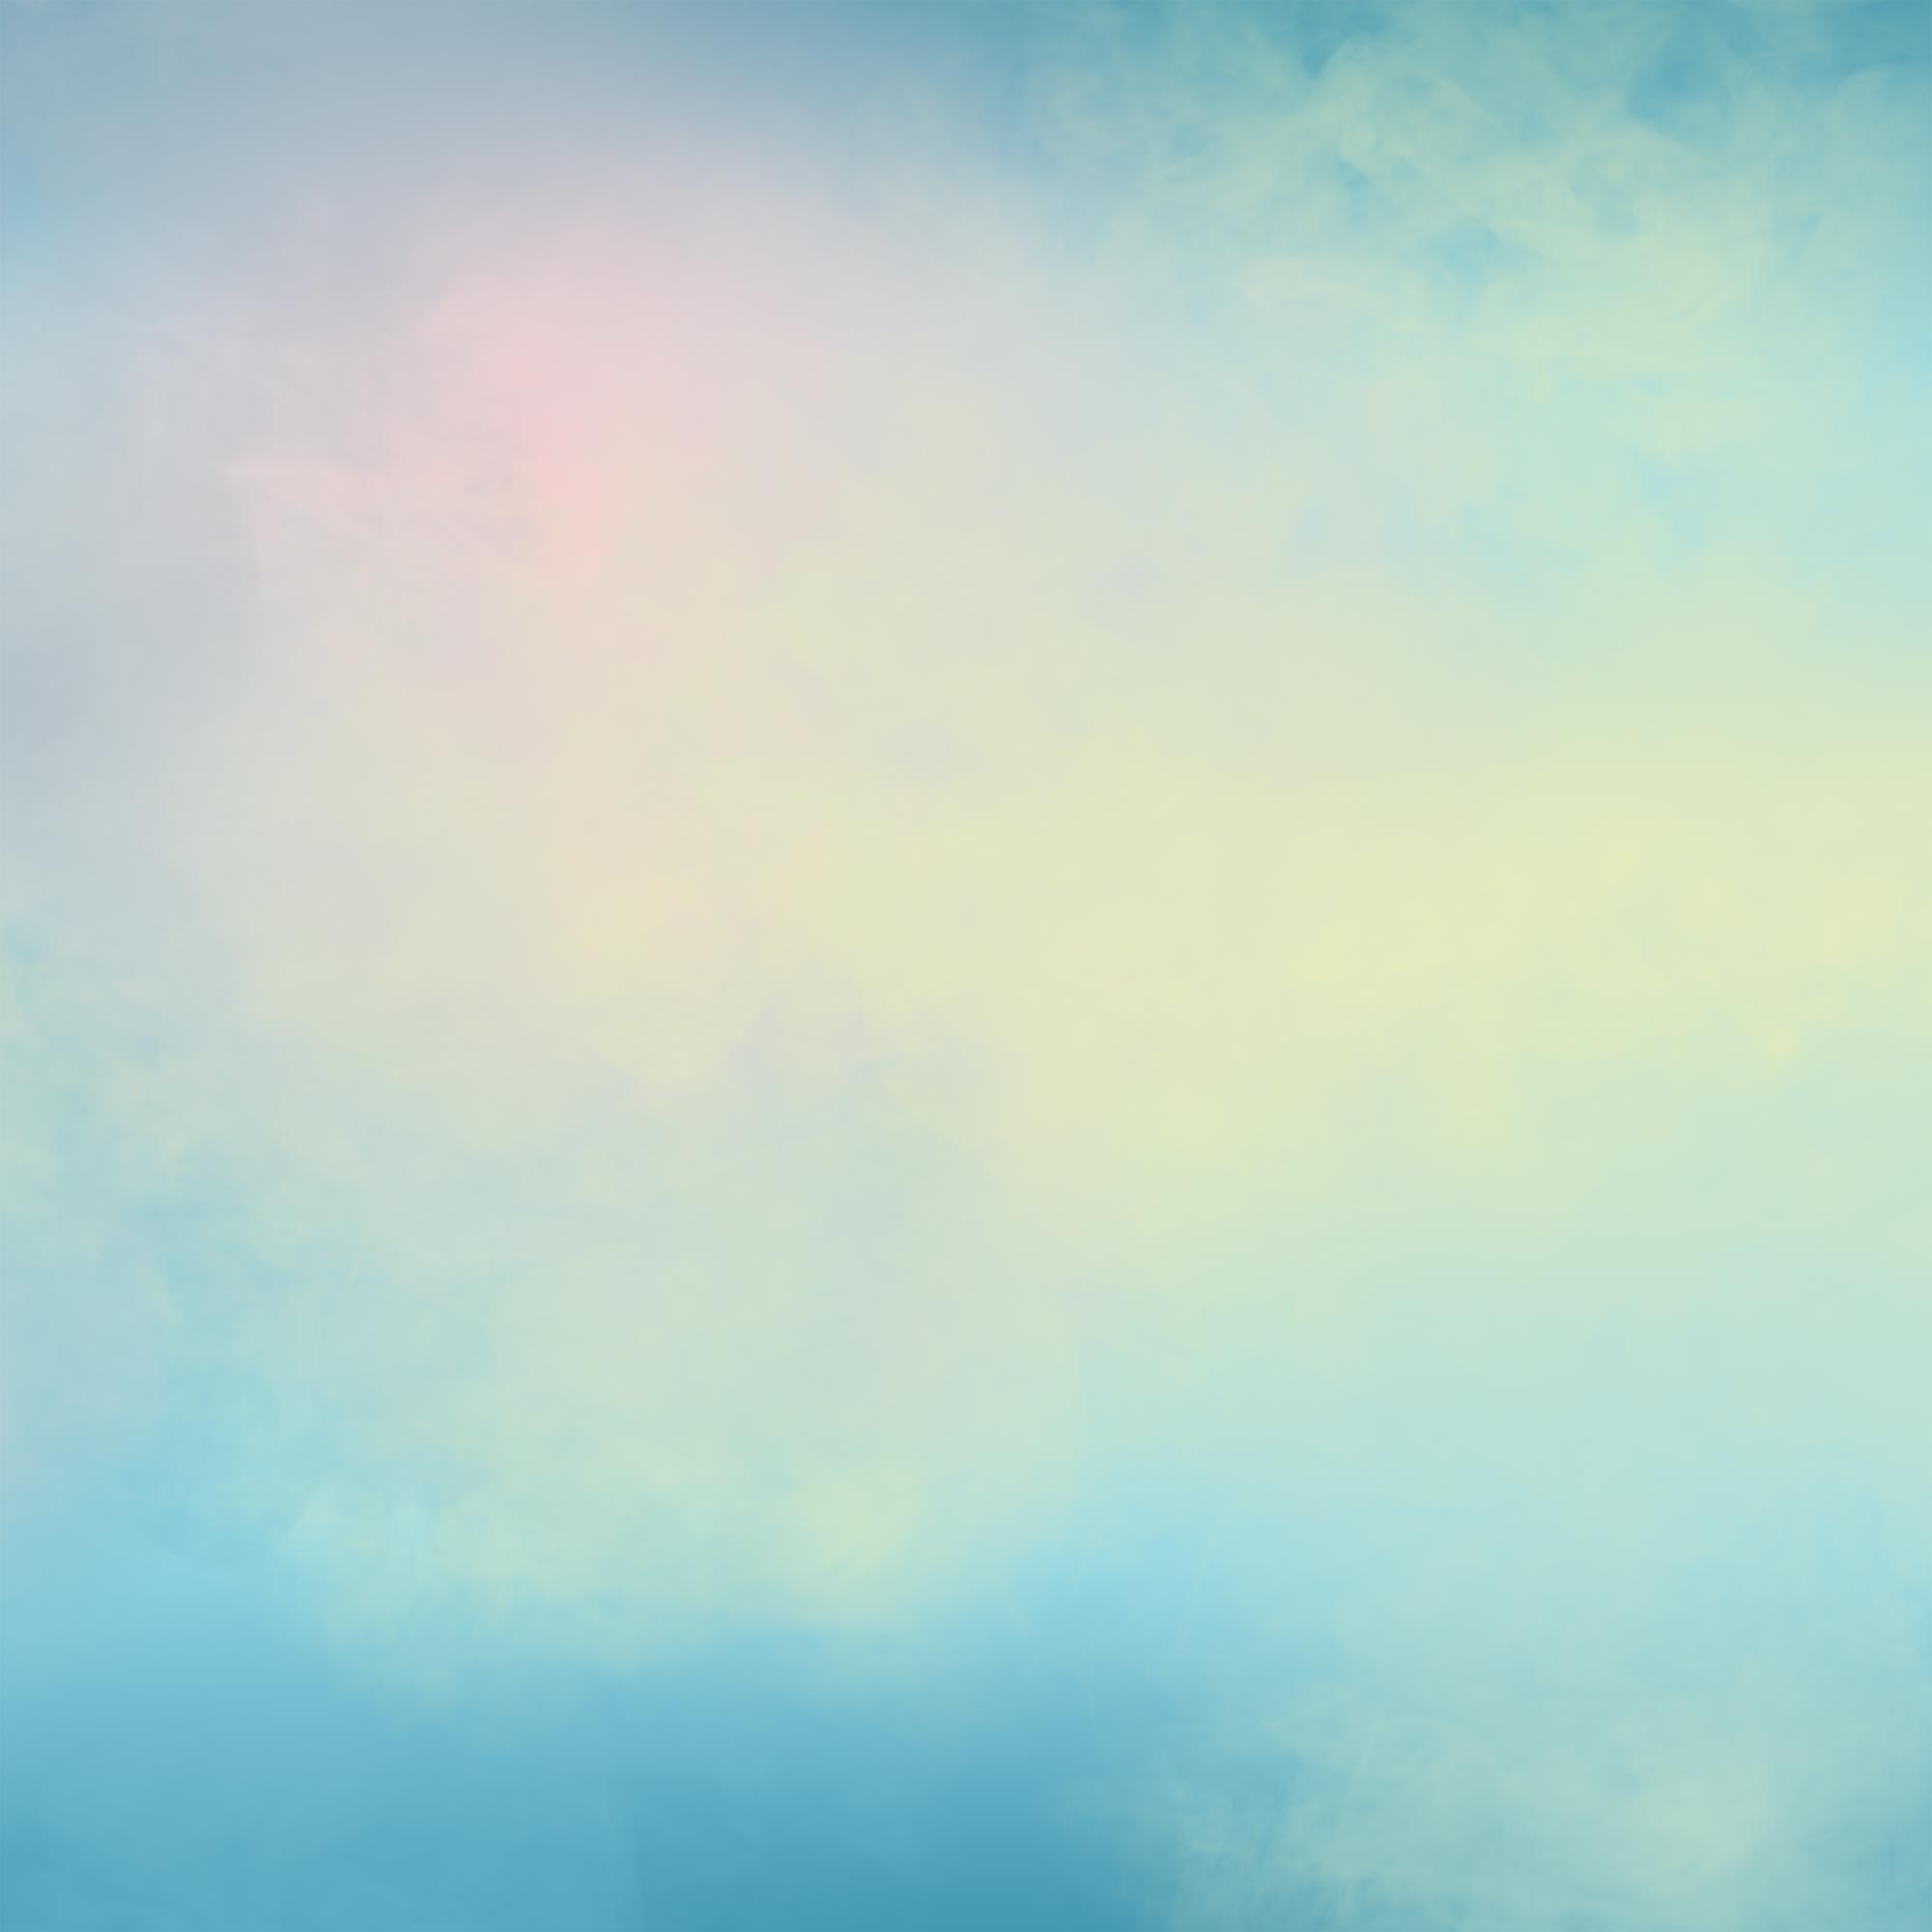 Pink Blue Smoke Brushes To Meld The New Area Into Background